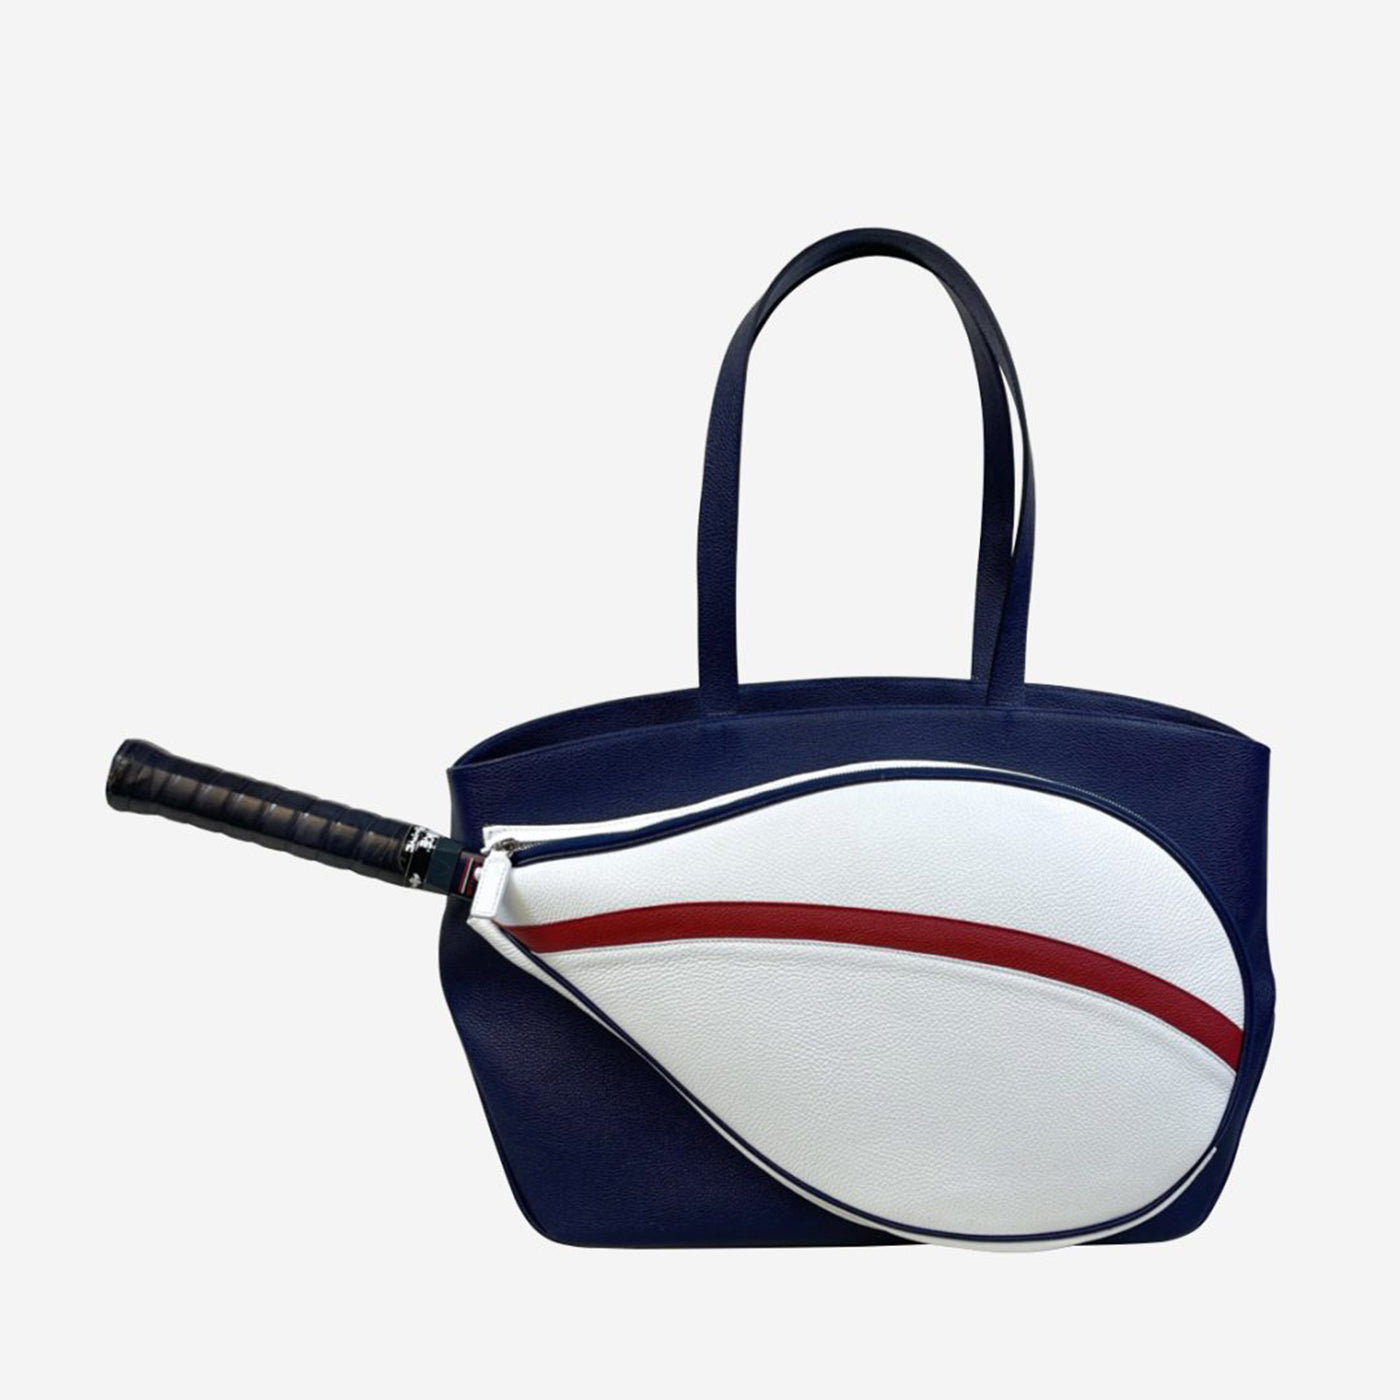 Sport Blue/Red/White Bag With Tennis-Racket-Shaped Pocket - Alternative view 5